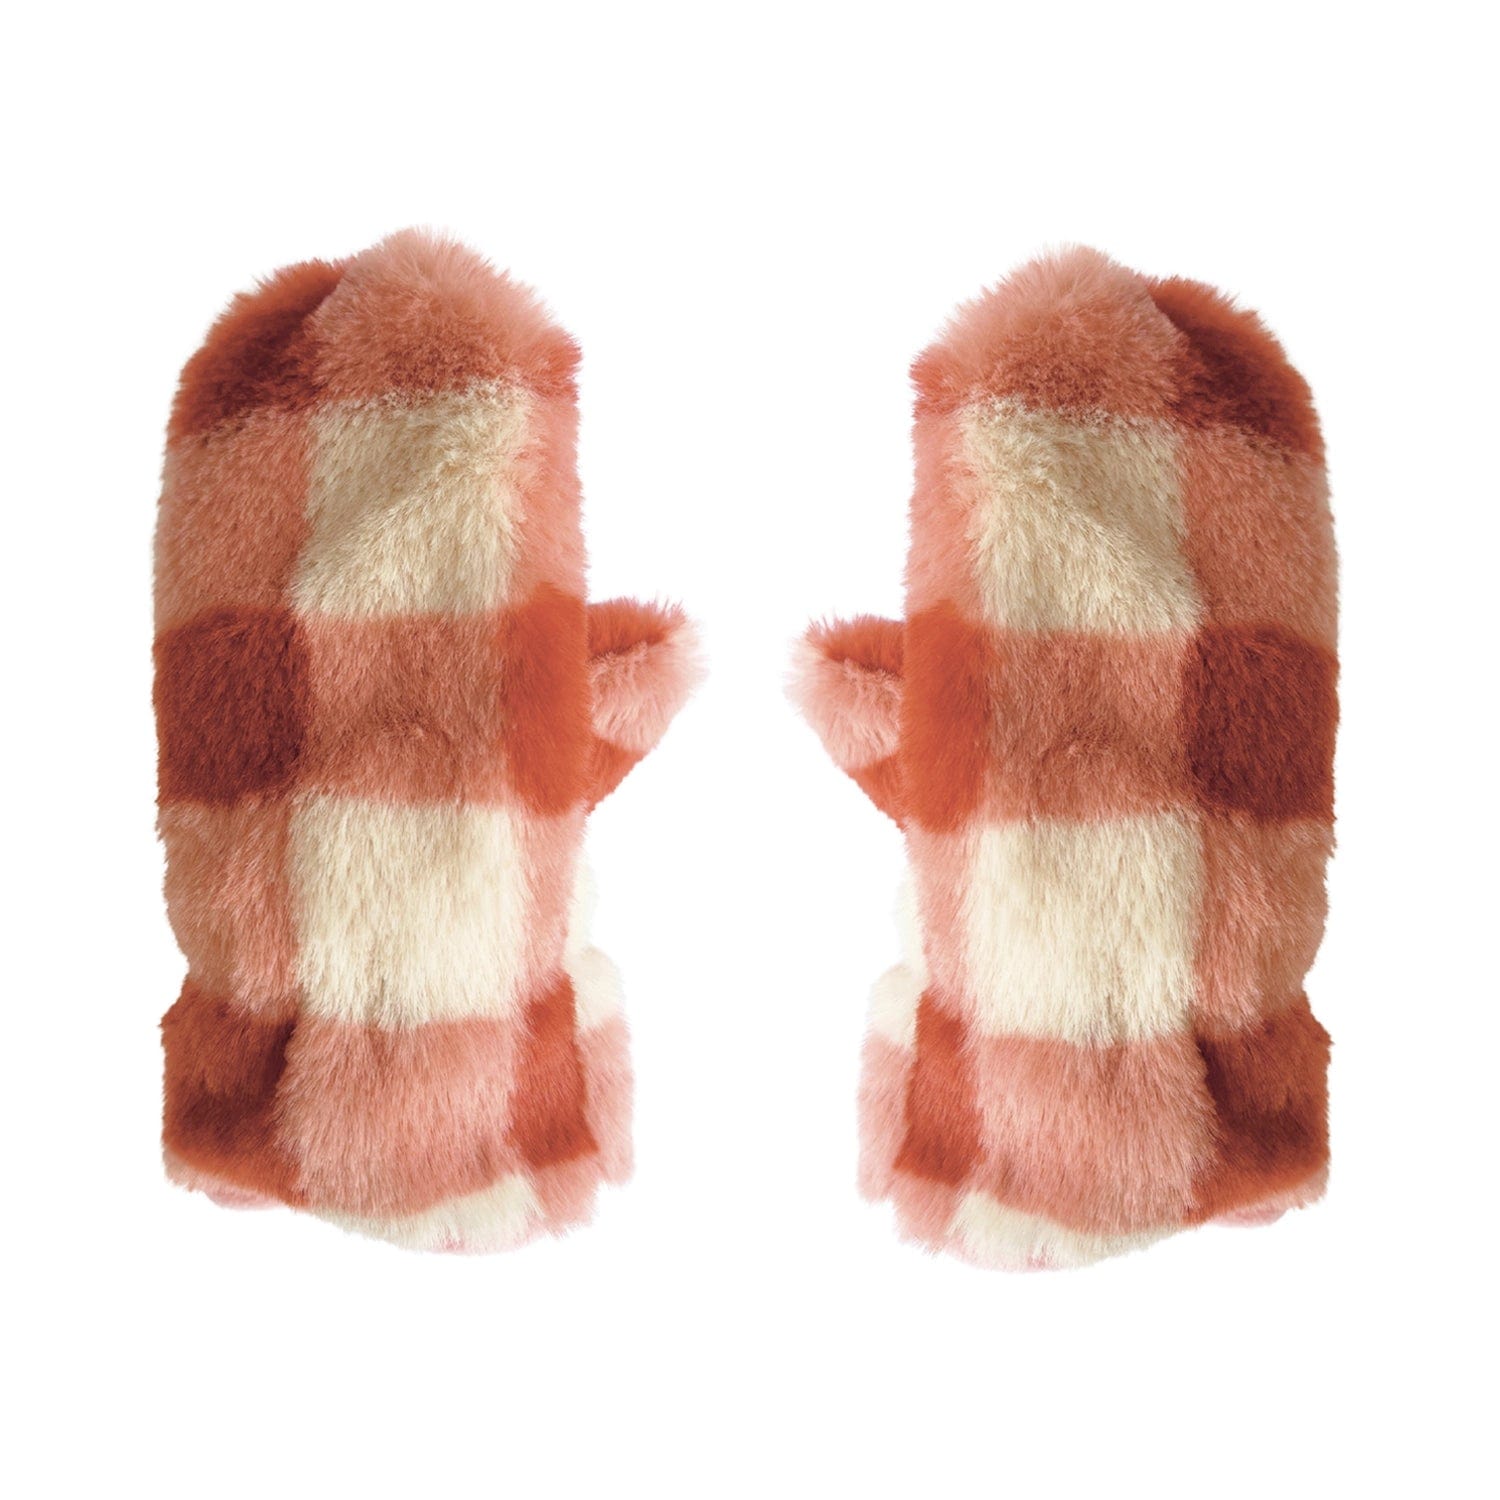 Coral Furry Checked Mittens (3-6 Years) Rockahula Kids Lil Tulips